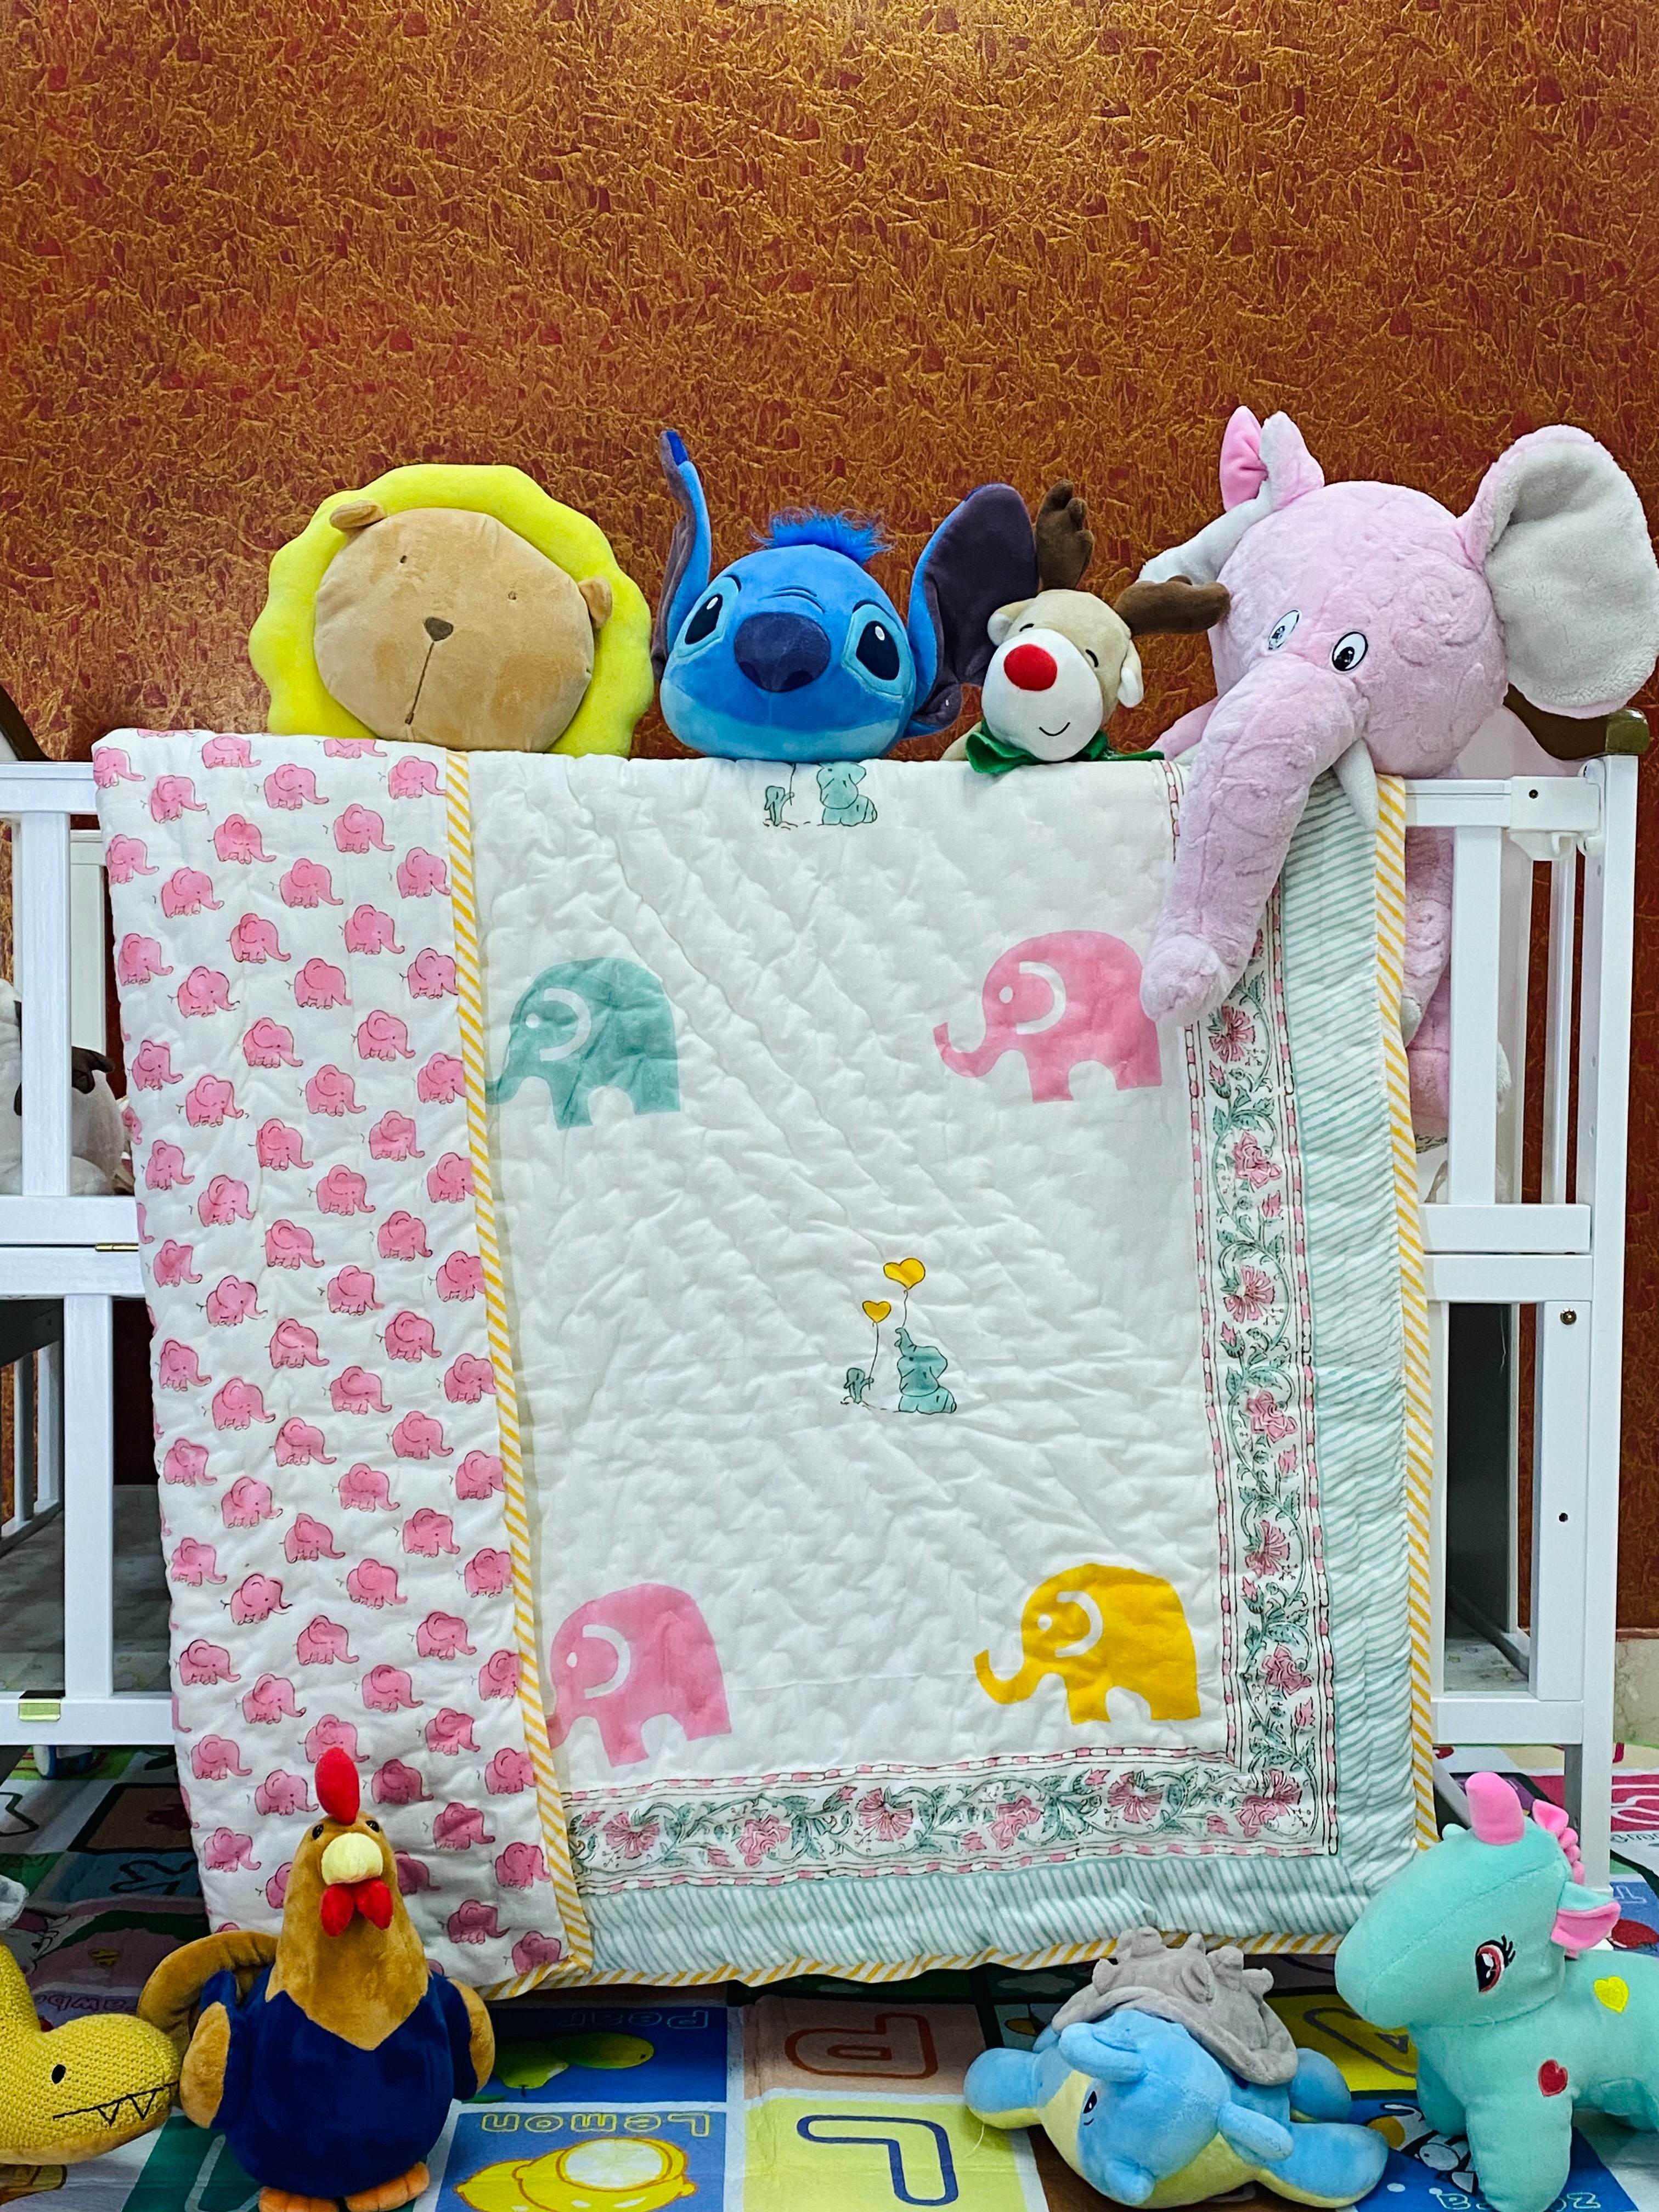 PREORDER Elephant Kids Quilt Handblock Printed- 60*40 inches (10-15 days dispatch time)